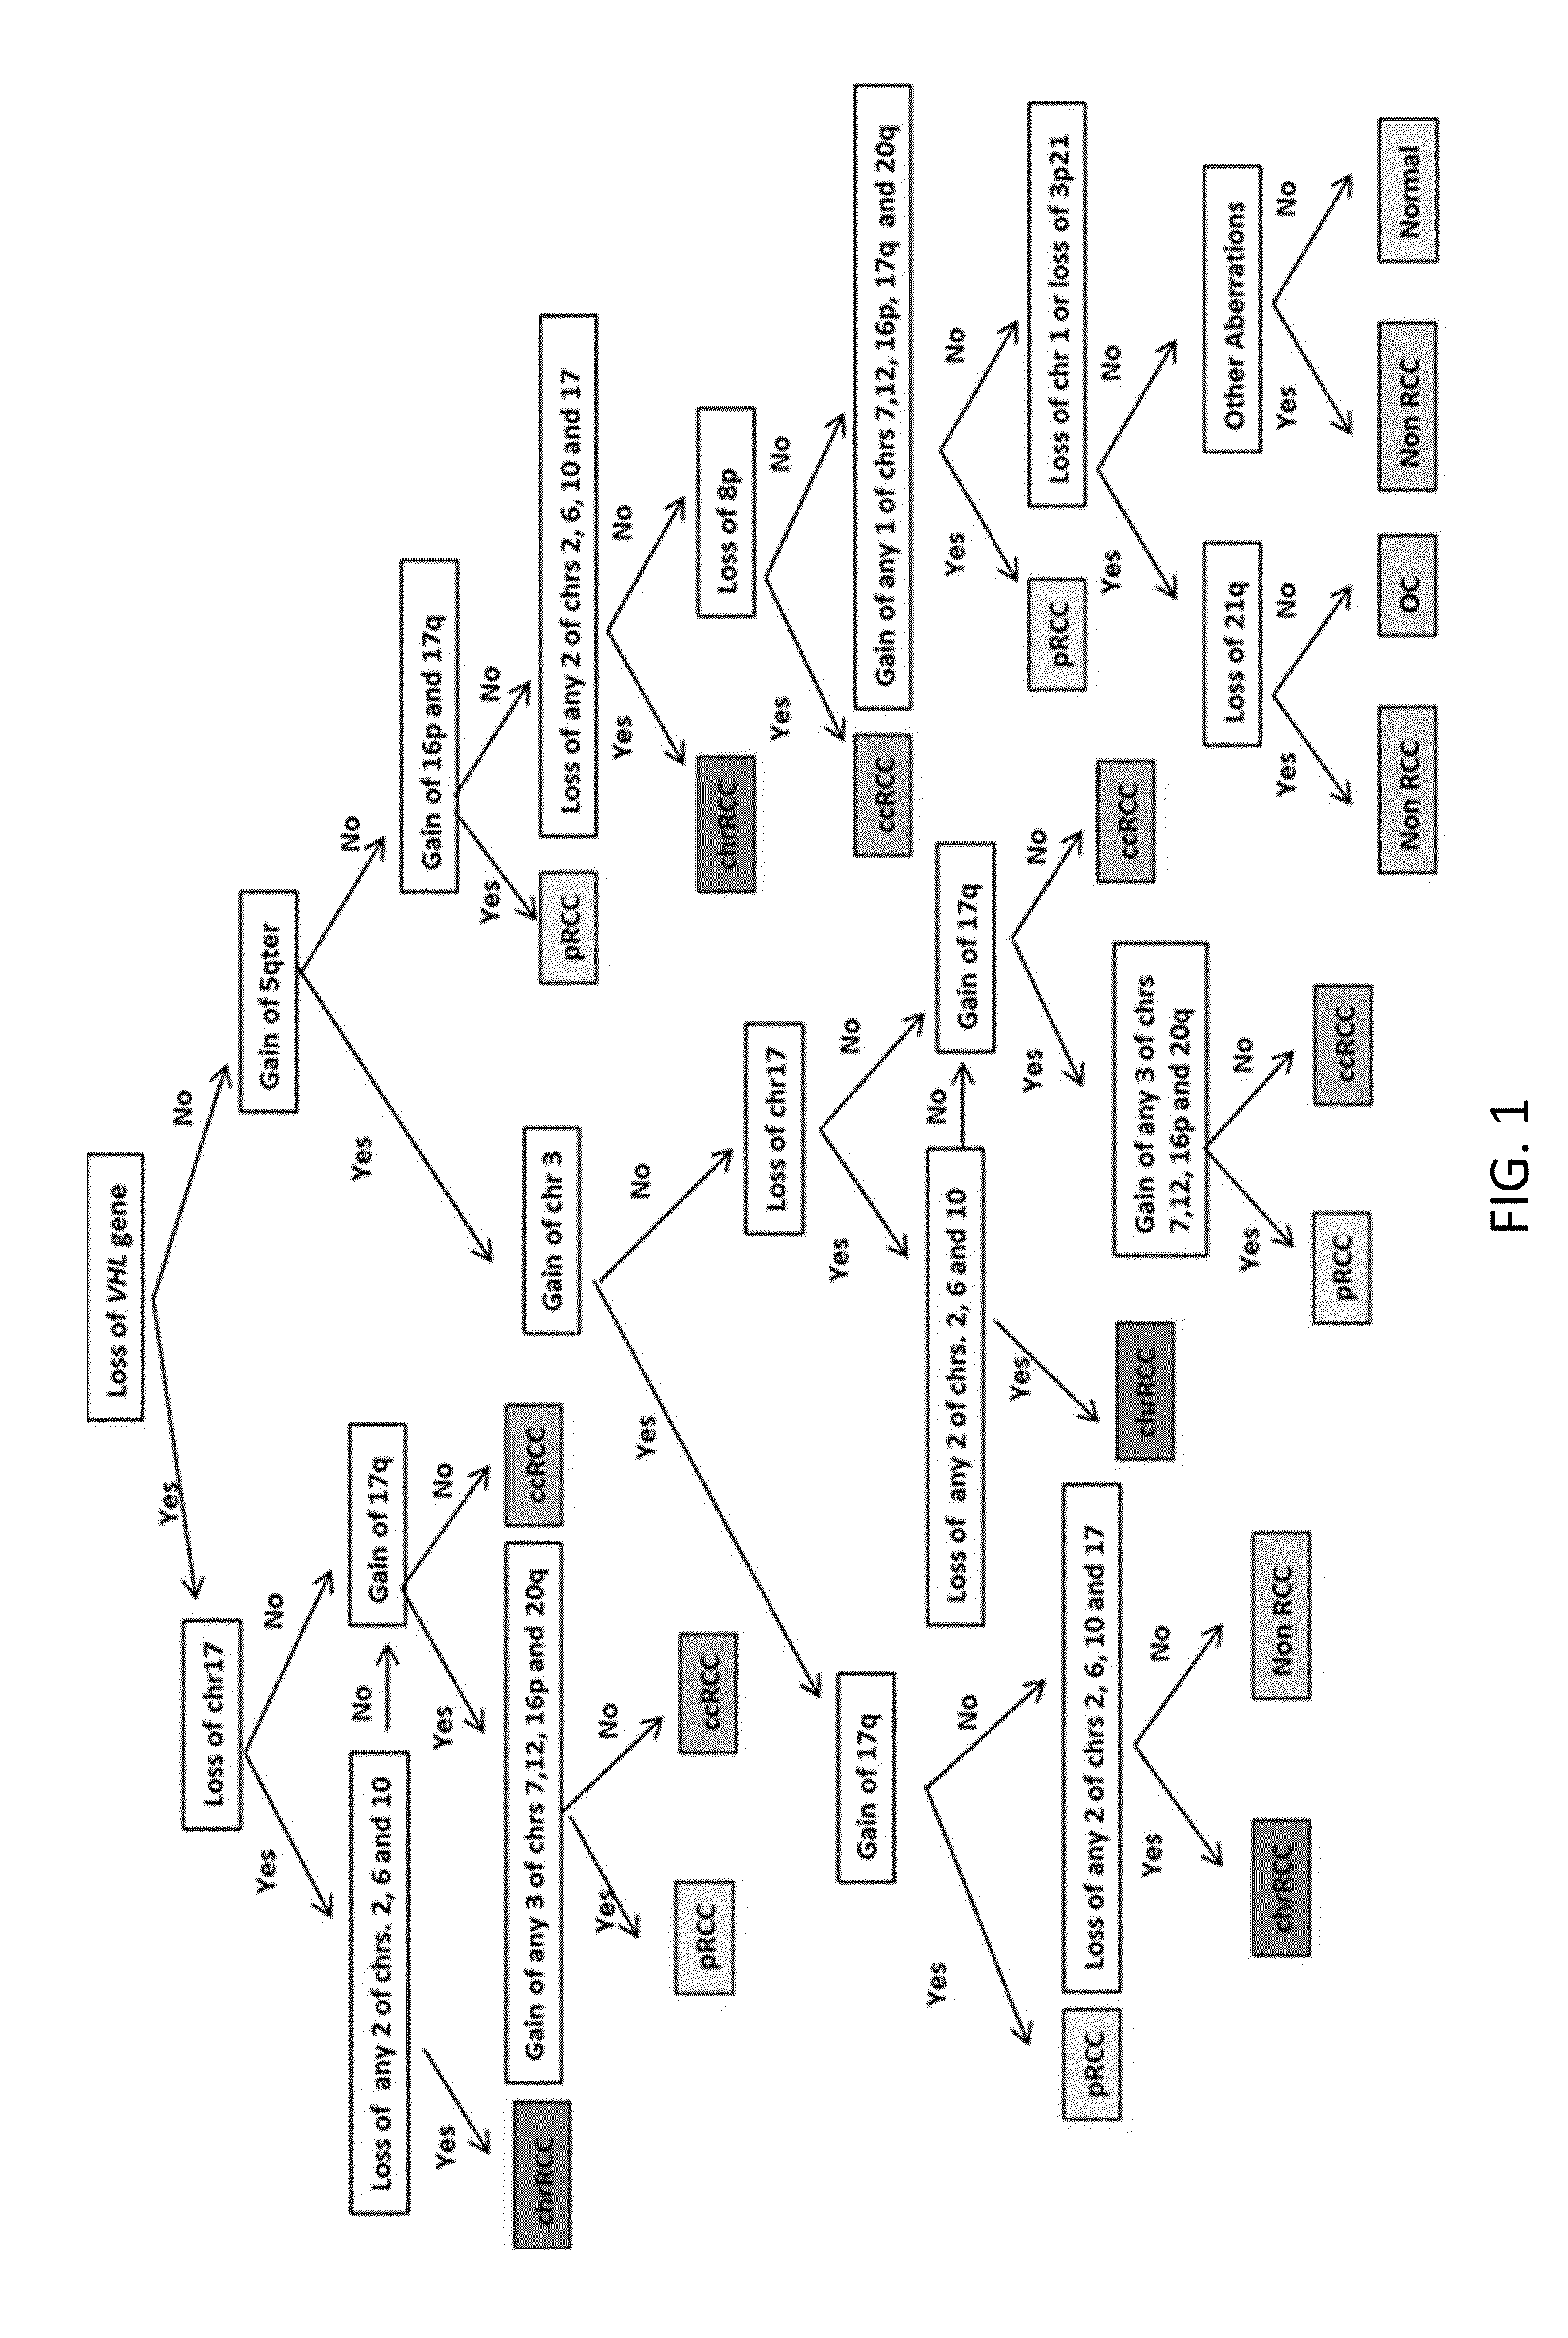 Methods and tools for the diagnosis and prognosis of urogenital cancers